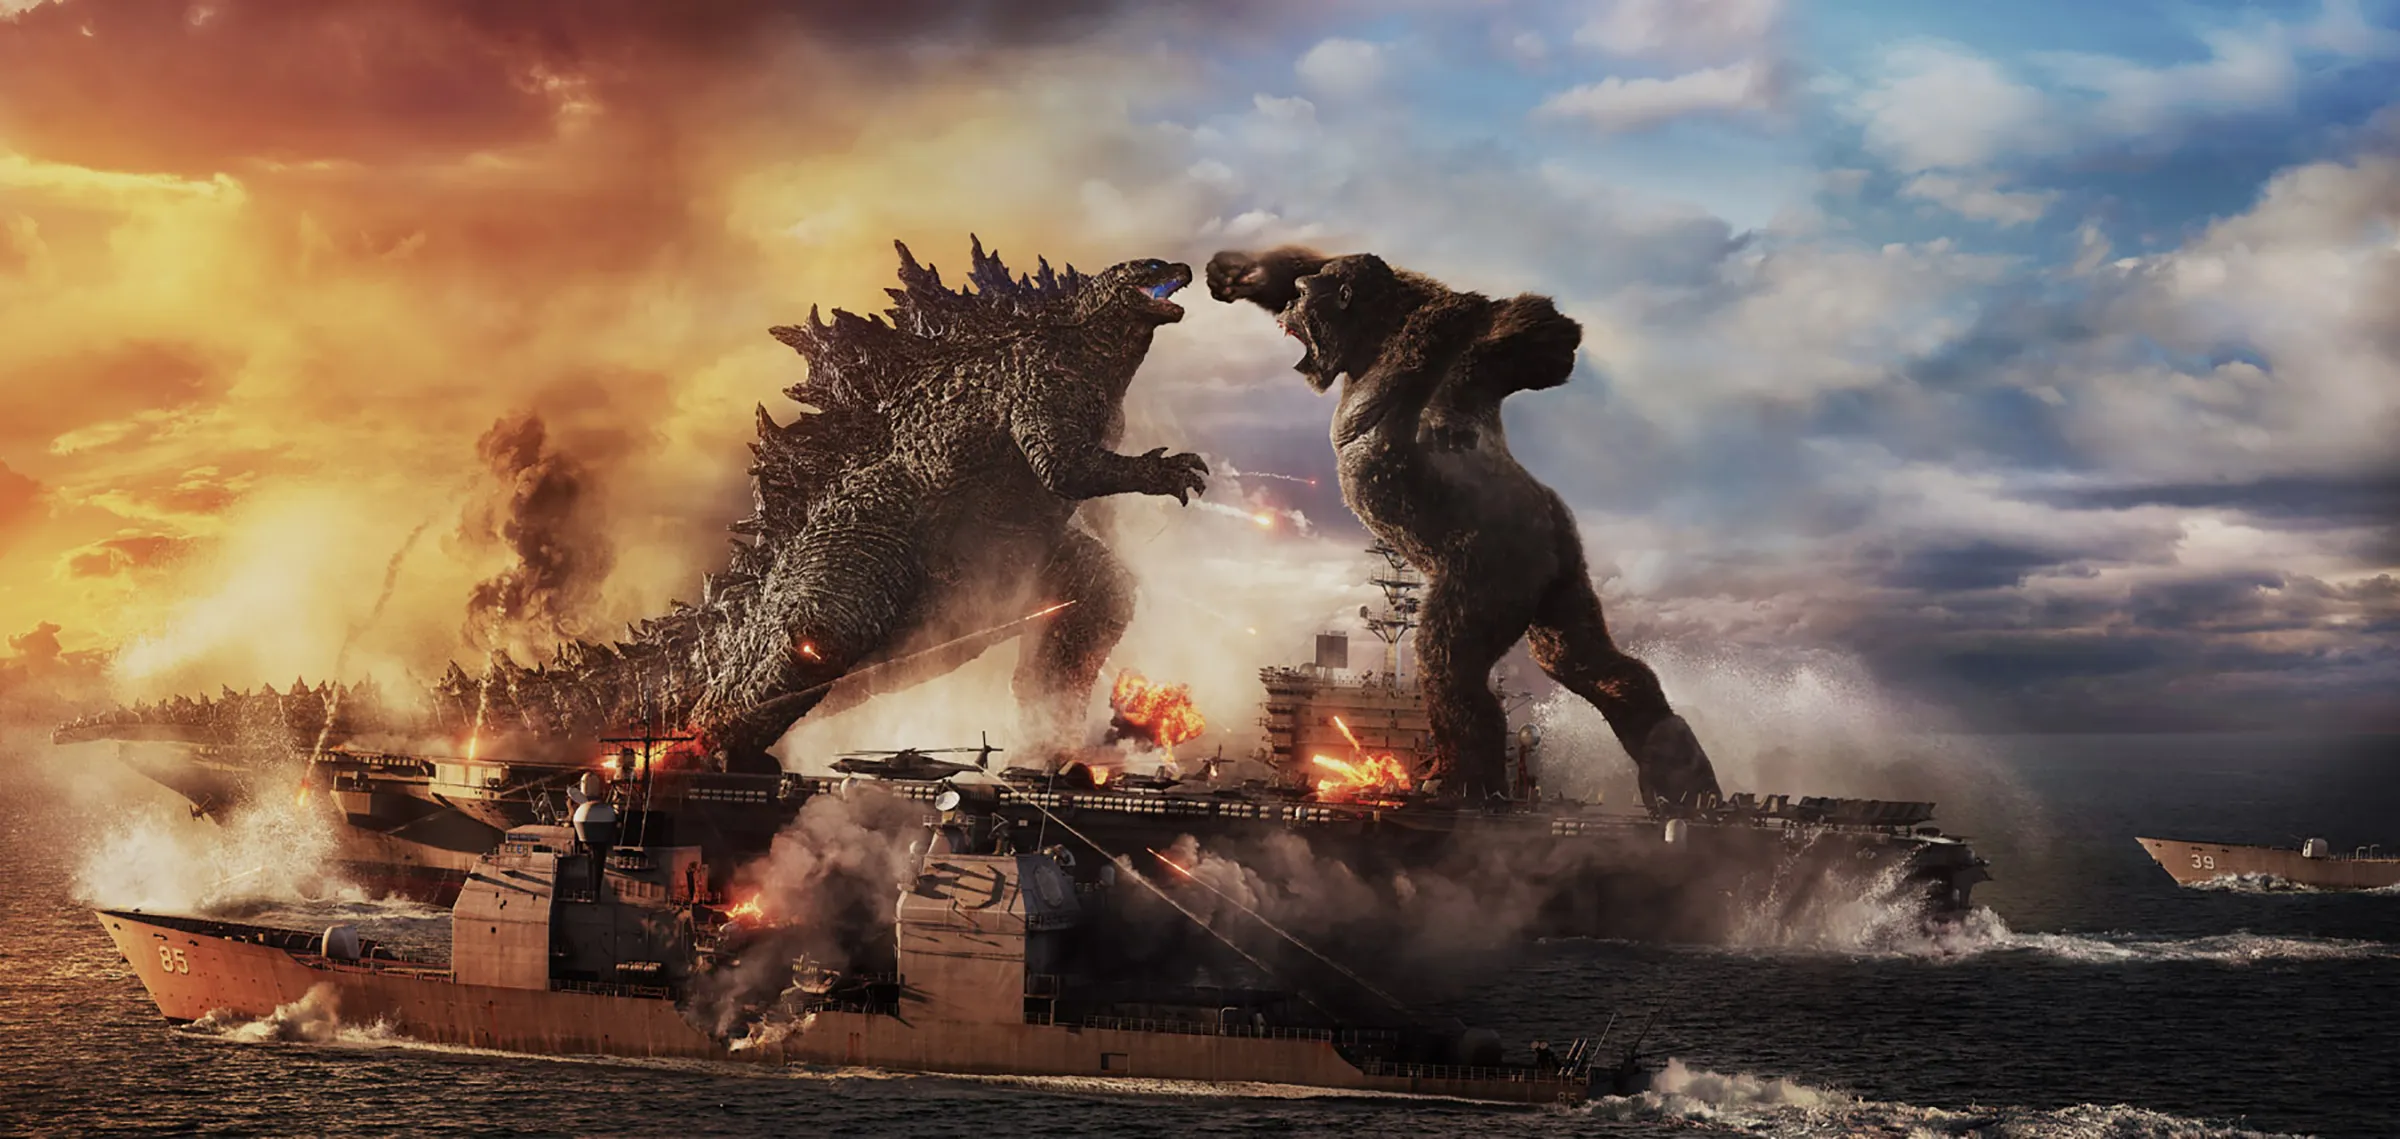 <p>Witness the ultimate clash of titans as Godzilla and Kong face off in a battle that will determine the fate of the world. With stunning visual effects and heart-pounding action, this film delivers an epic showdown of colossal proportions.</p>